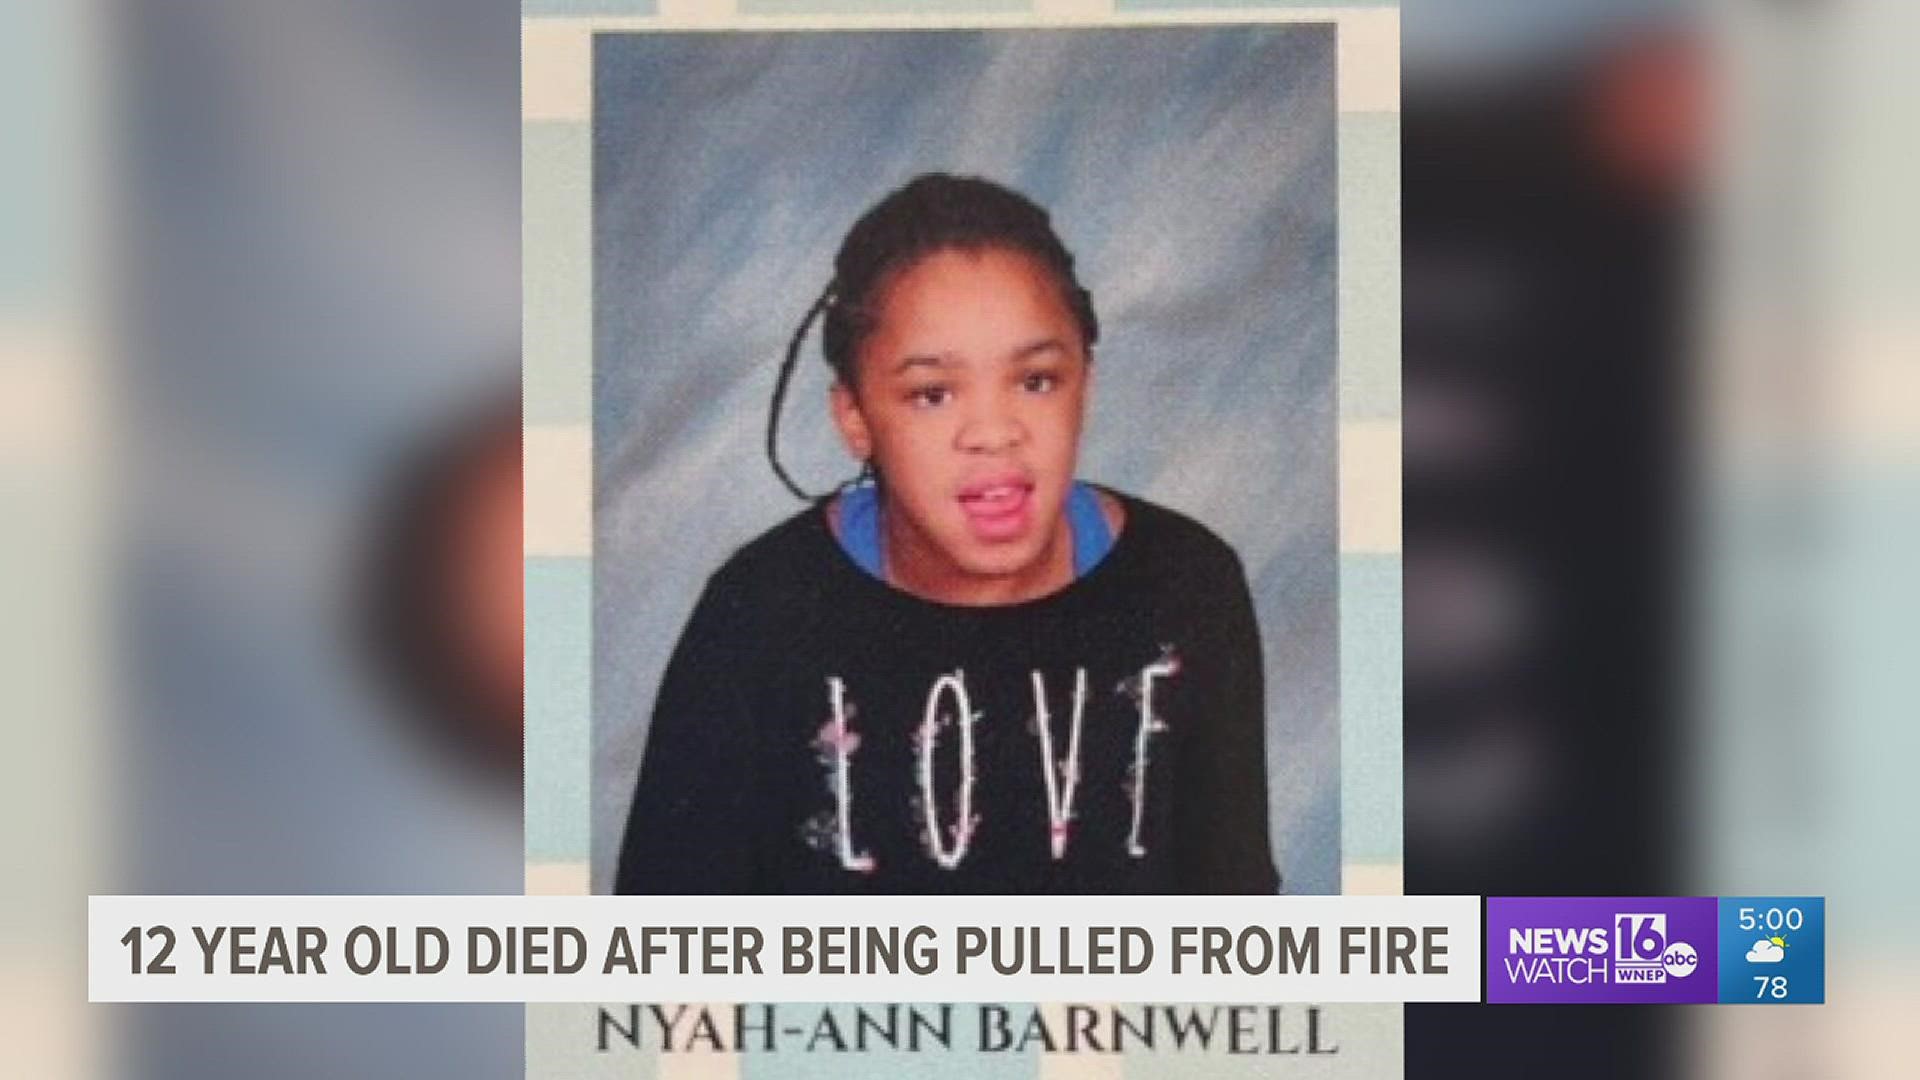 Firefighters say the 12-year-old girl was trapped on the second floor of the home. It took six firefighters to get her out. She later died at the hospital.